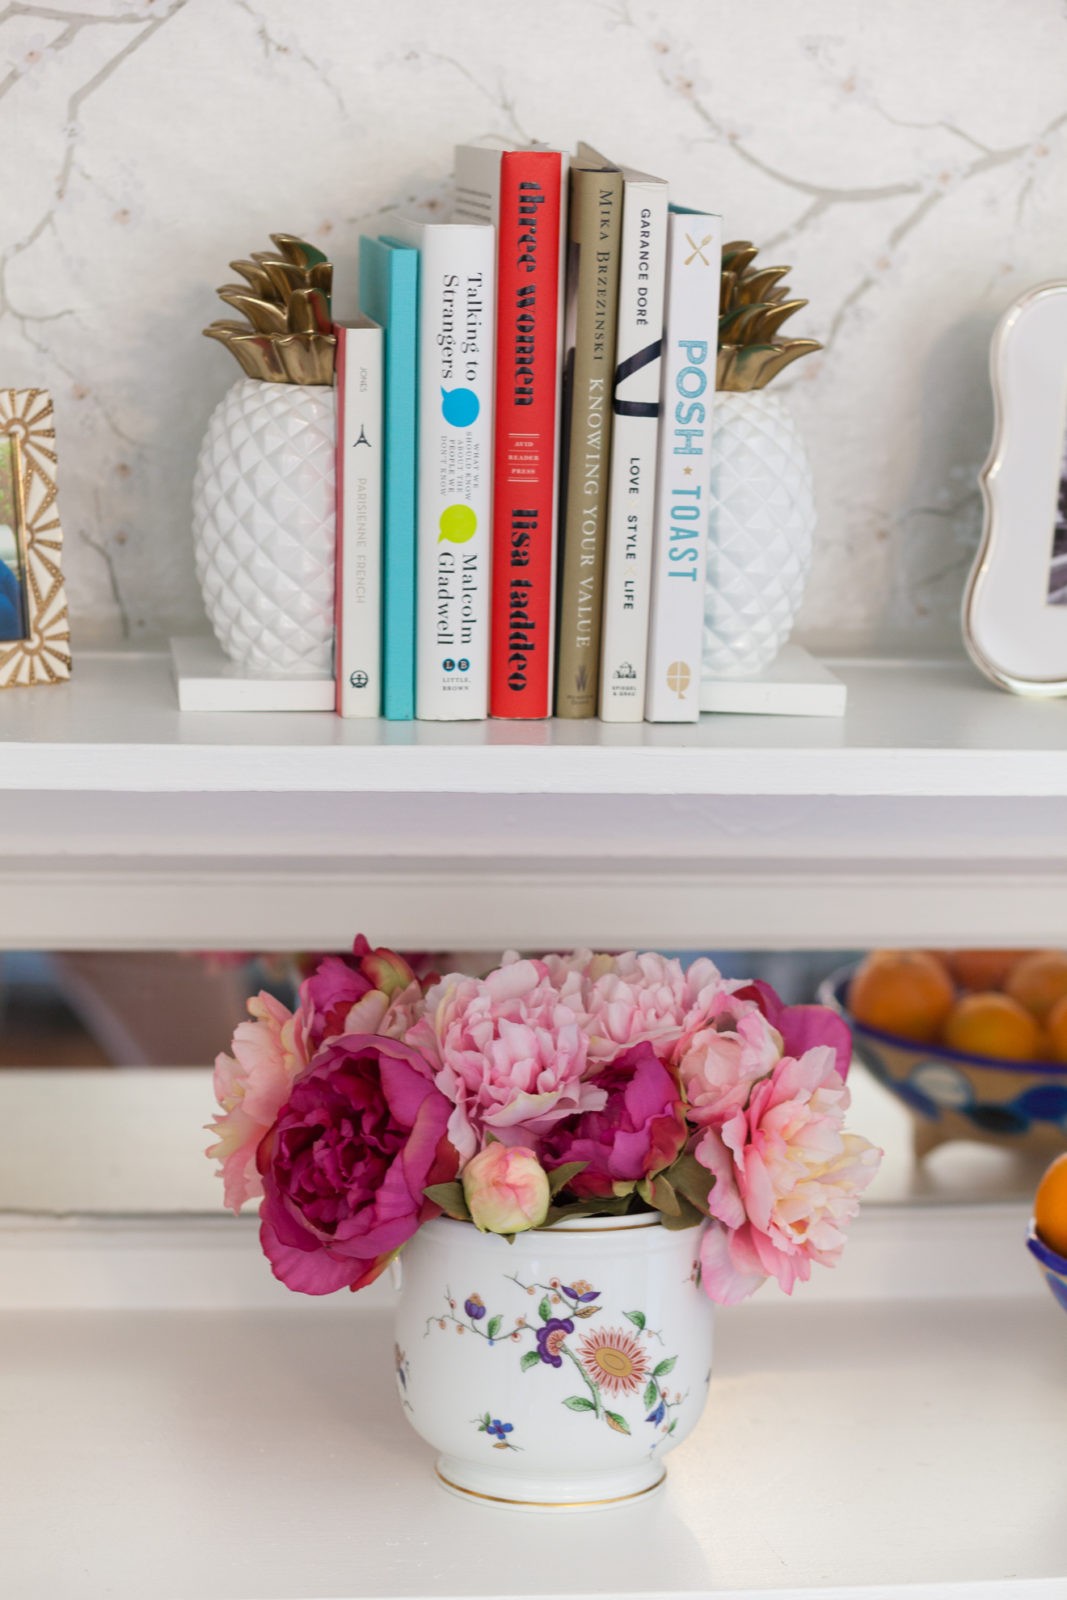 How to Decorate a Bookshelf,DIY Home Decor hutch remodel by Los Angeles Home Decor Blogger Laura Lily,